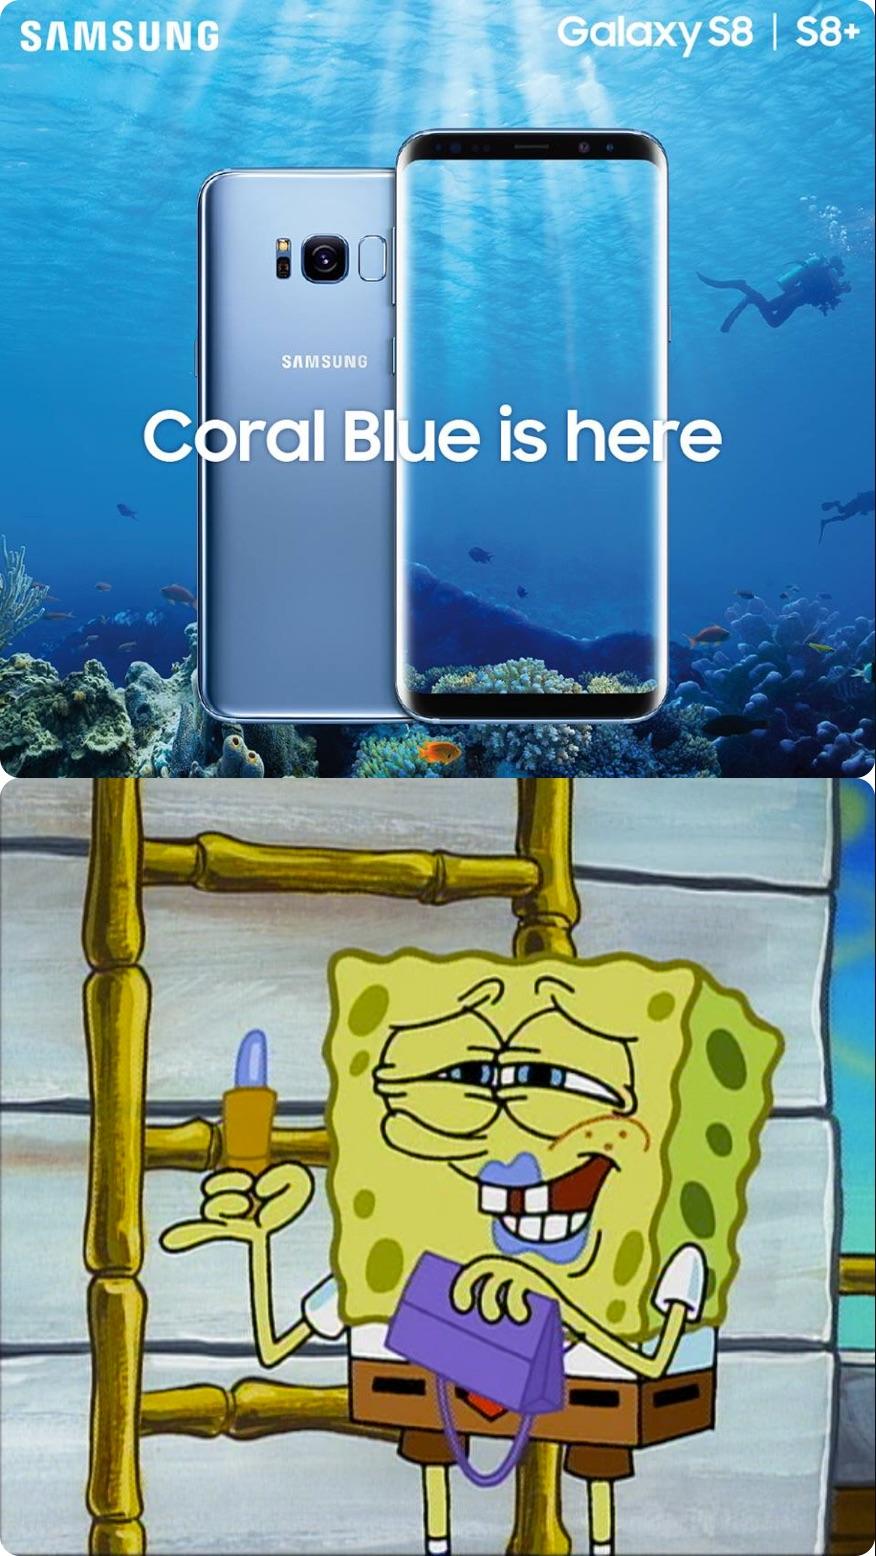 Coral Blue is here